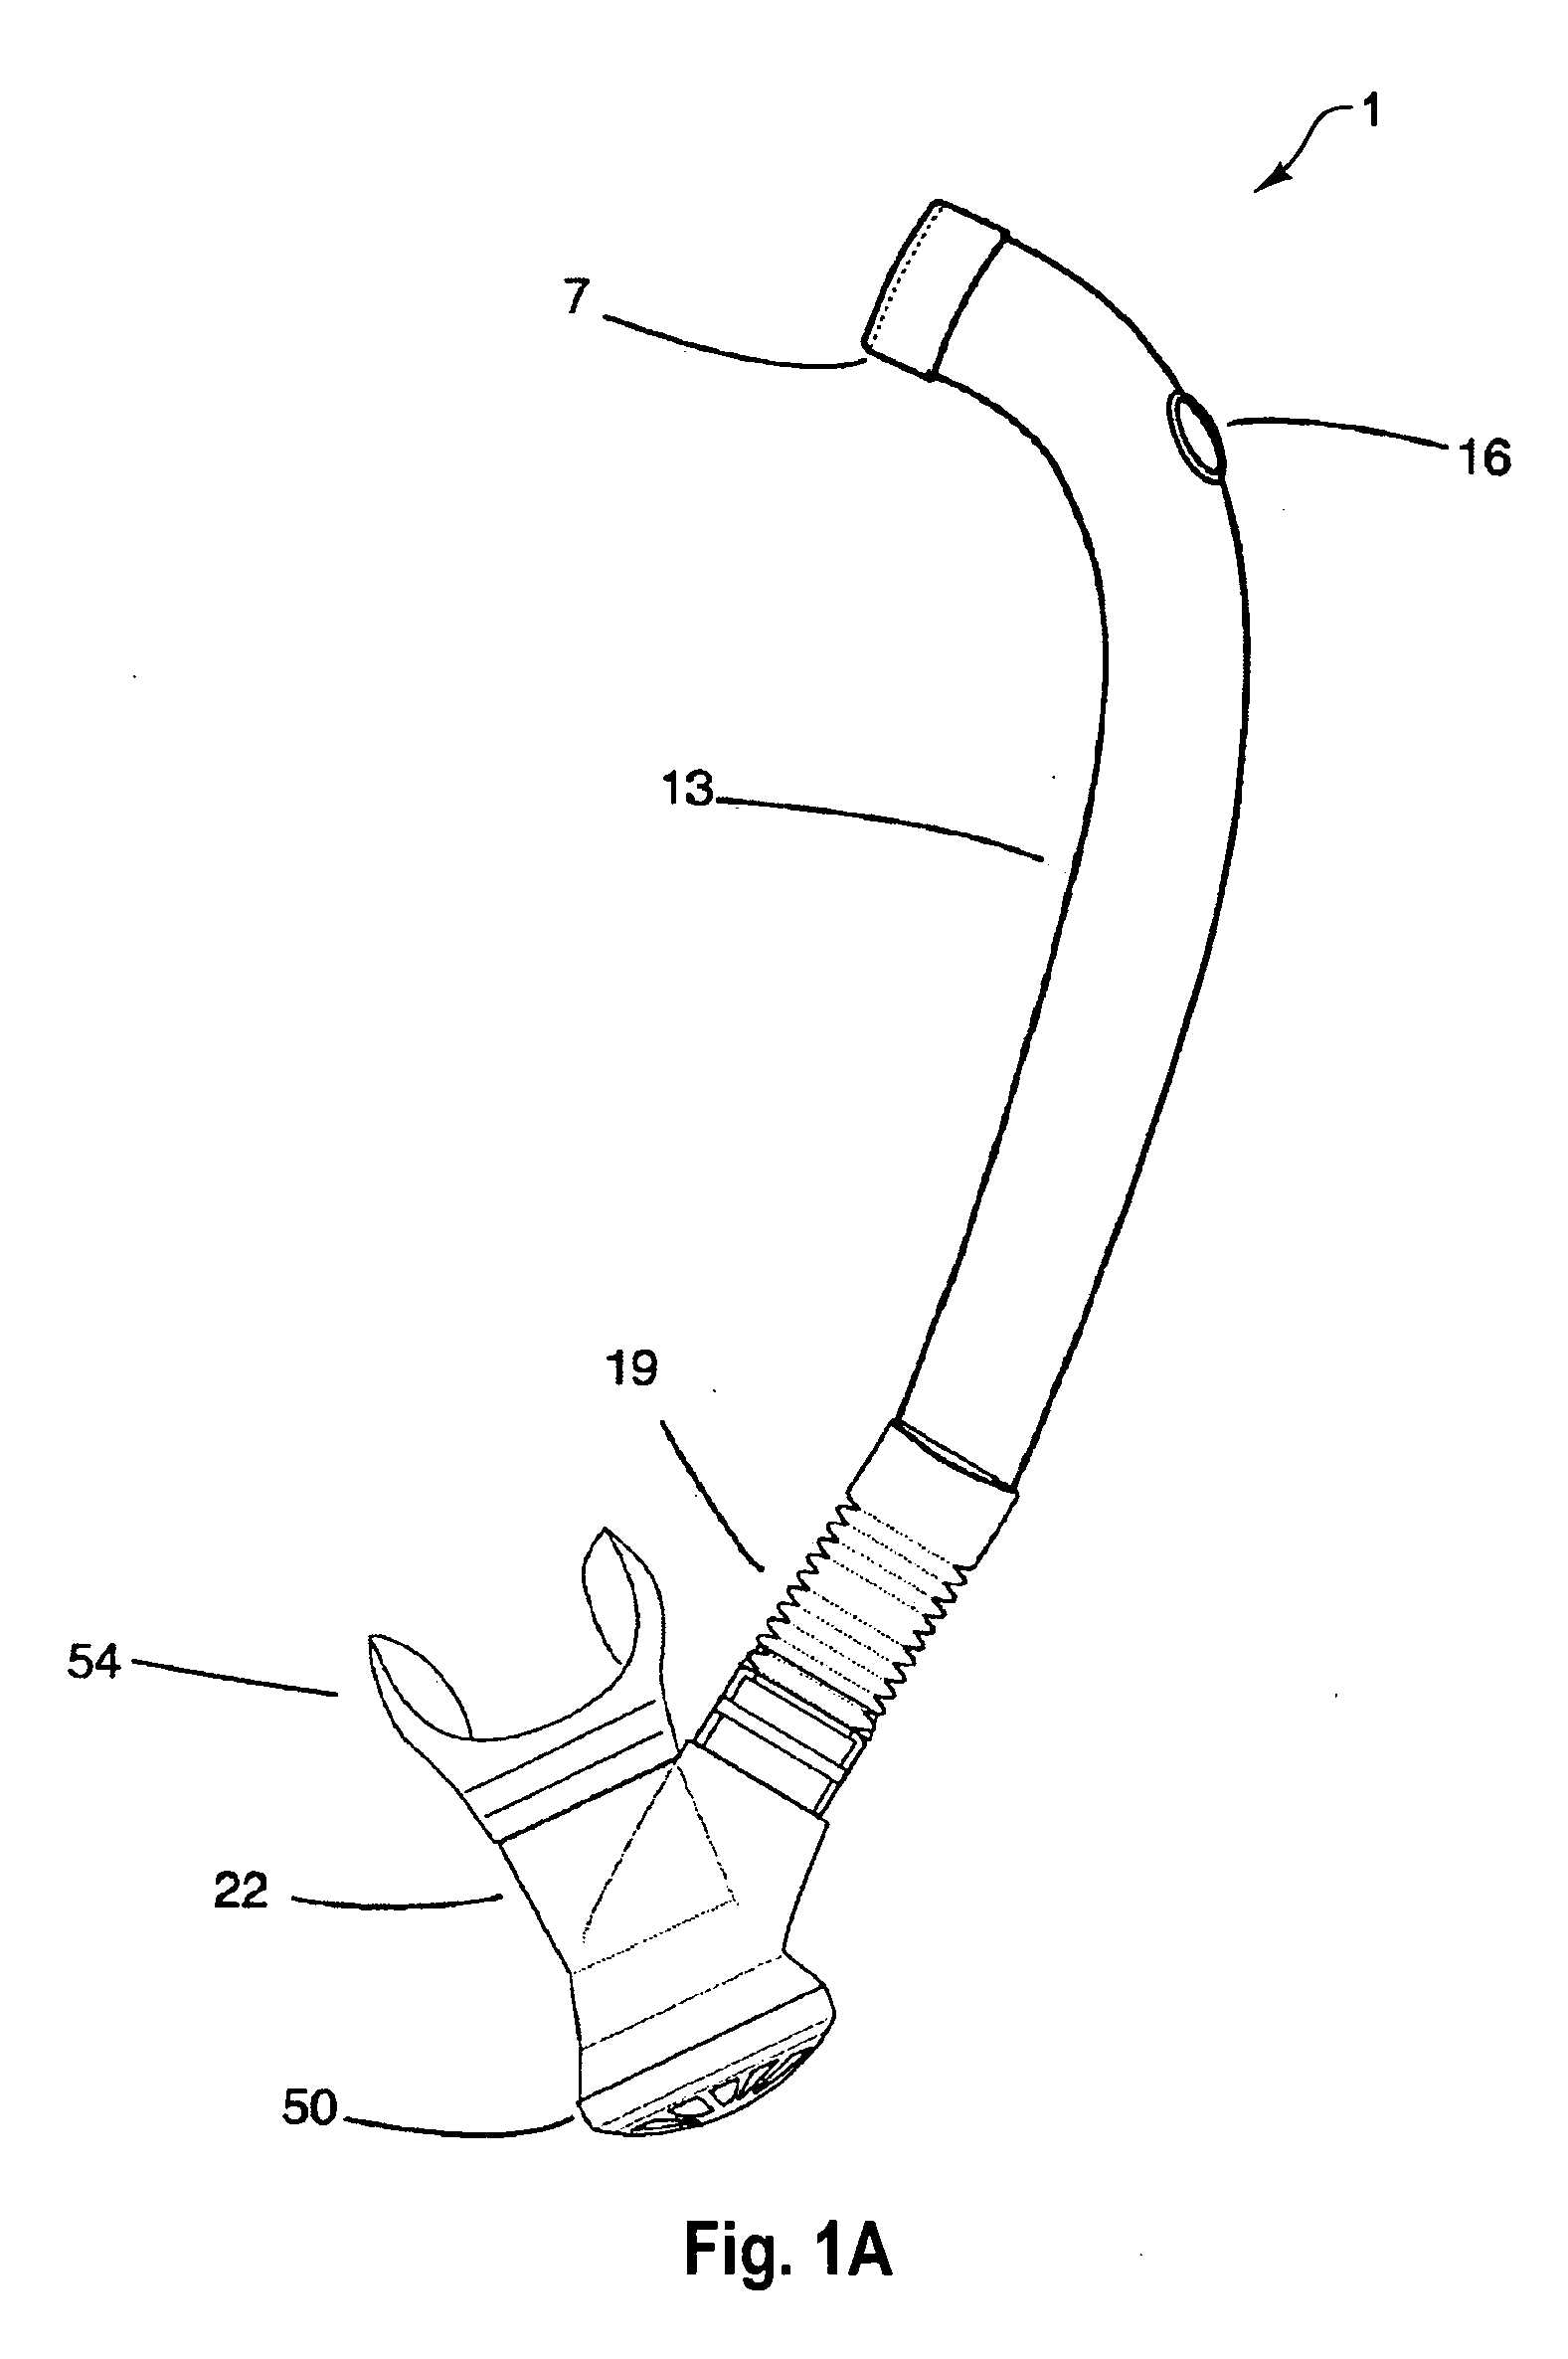 Exhalation valve for use in an underwater breathing device